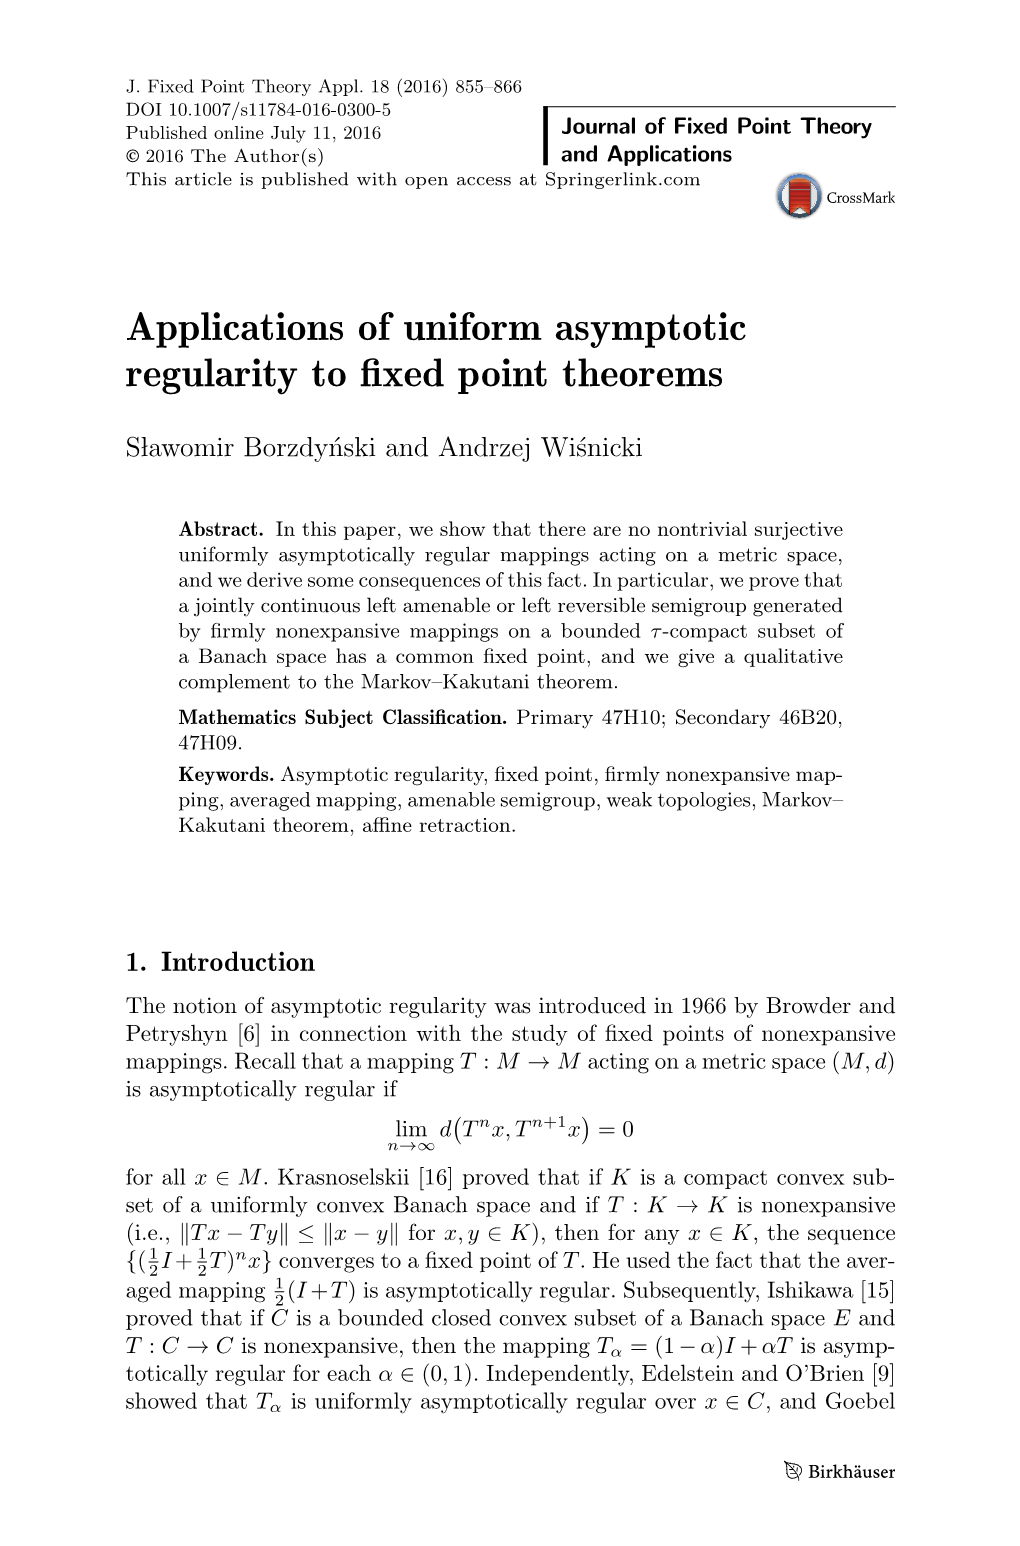 Applications of Uniform Asymptotic Regularity to Fixed Point Theorems